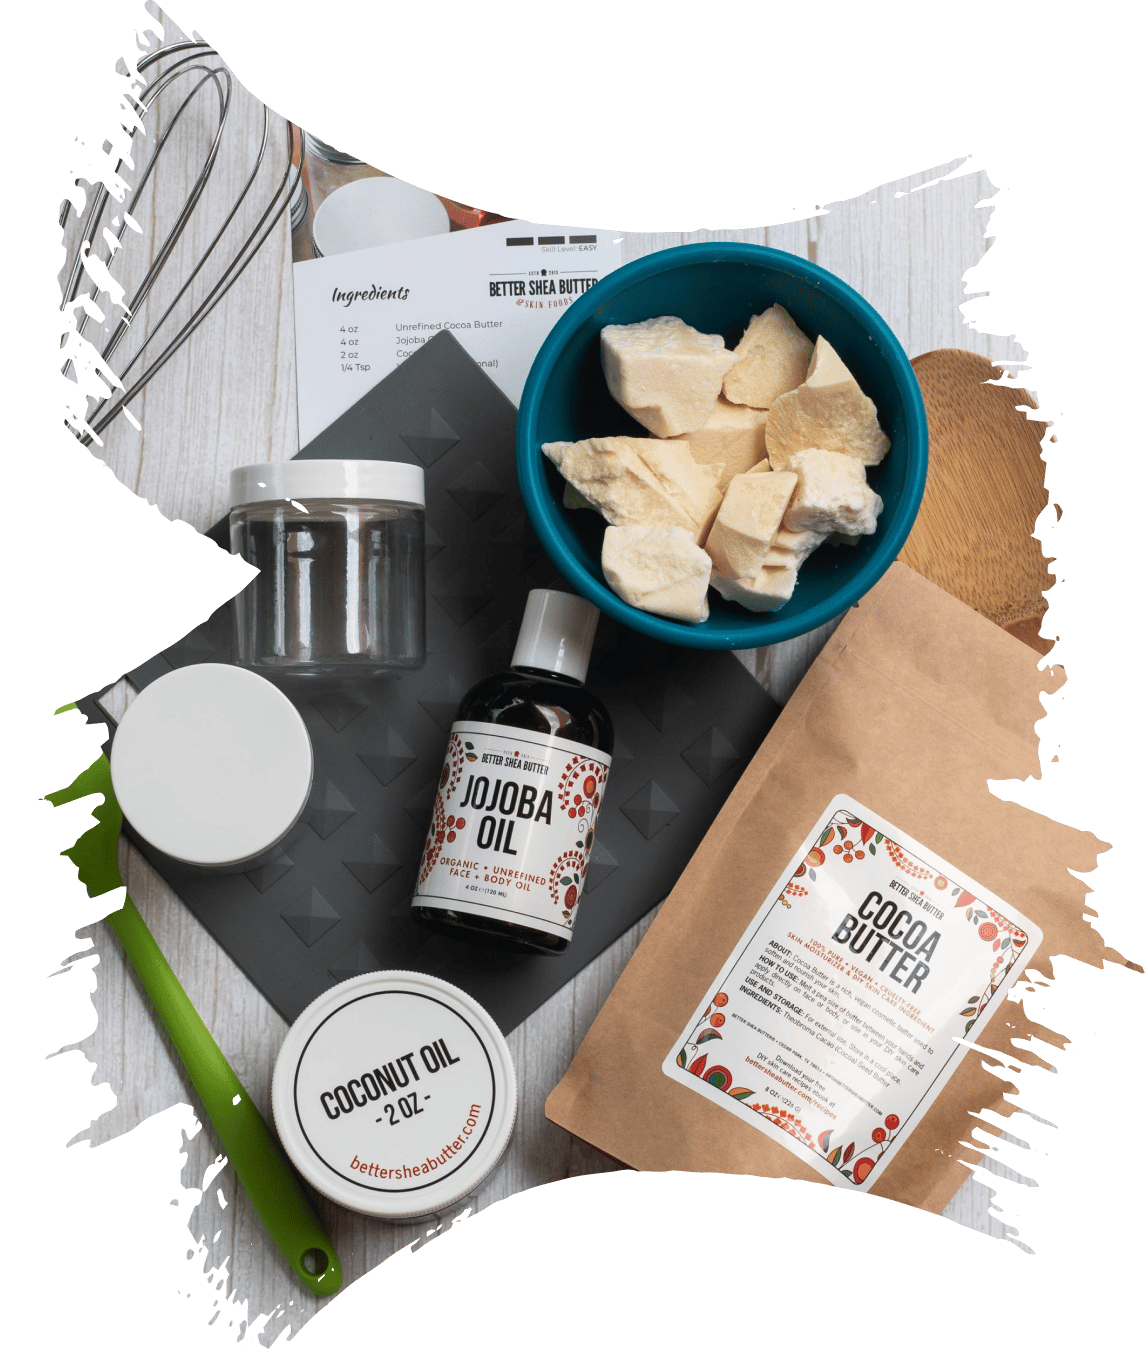 Cocoa Body Butter Making Kit |Includes Unrefined Cocoa Butter, Jojoba Oil, Coconut Oil, 2 Jars and DIY Whipped Cocoa Butter Recipe Card with Link to